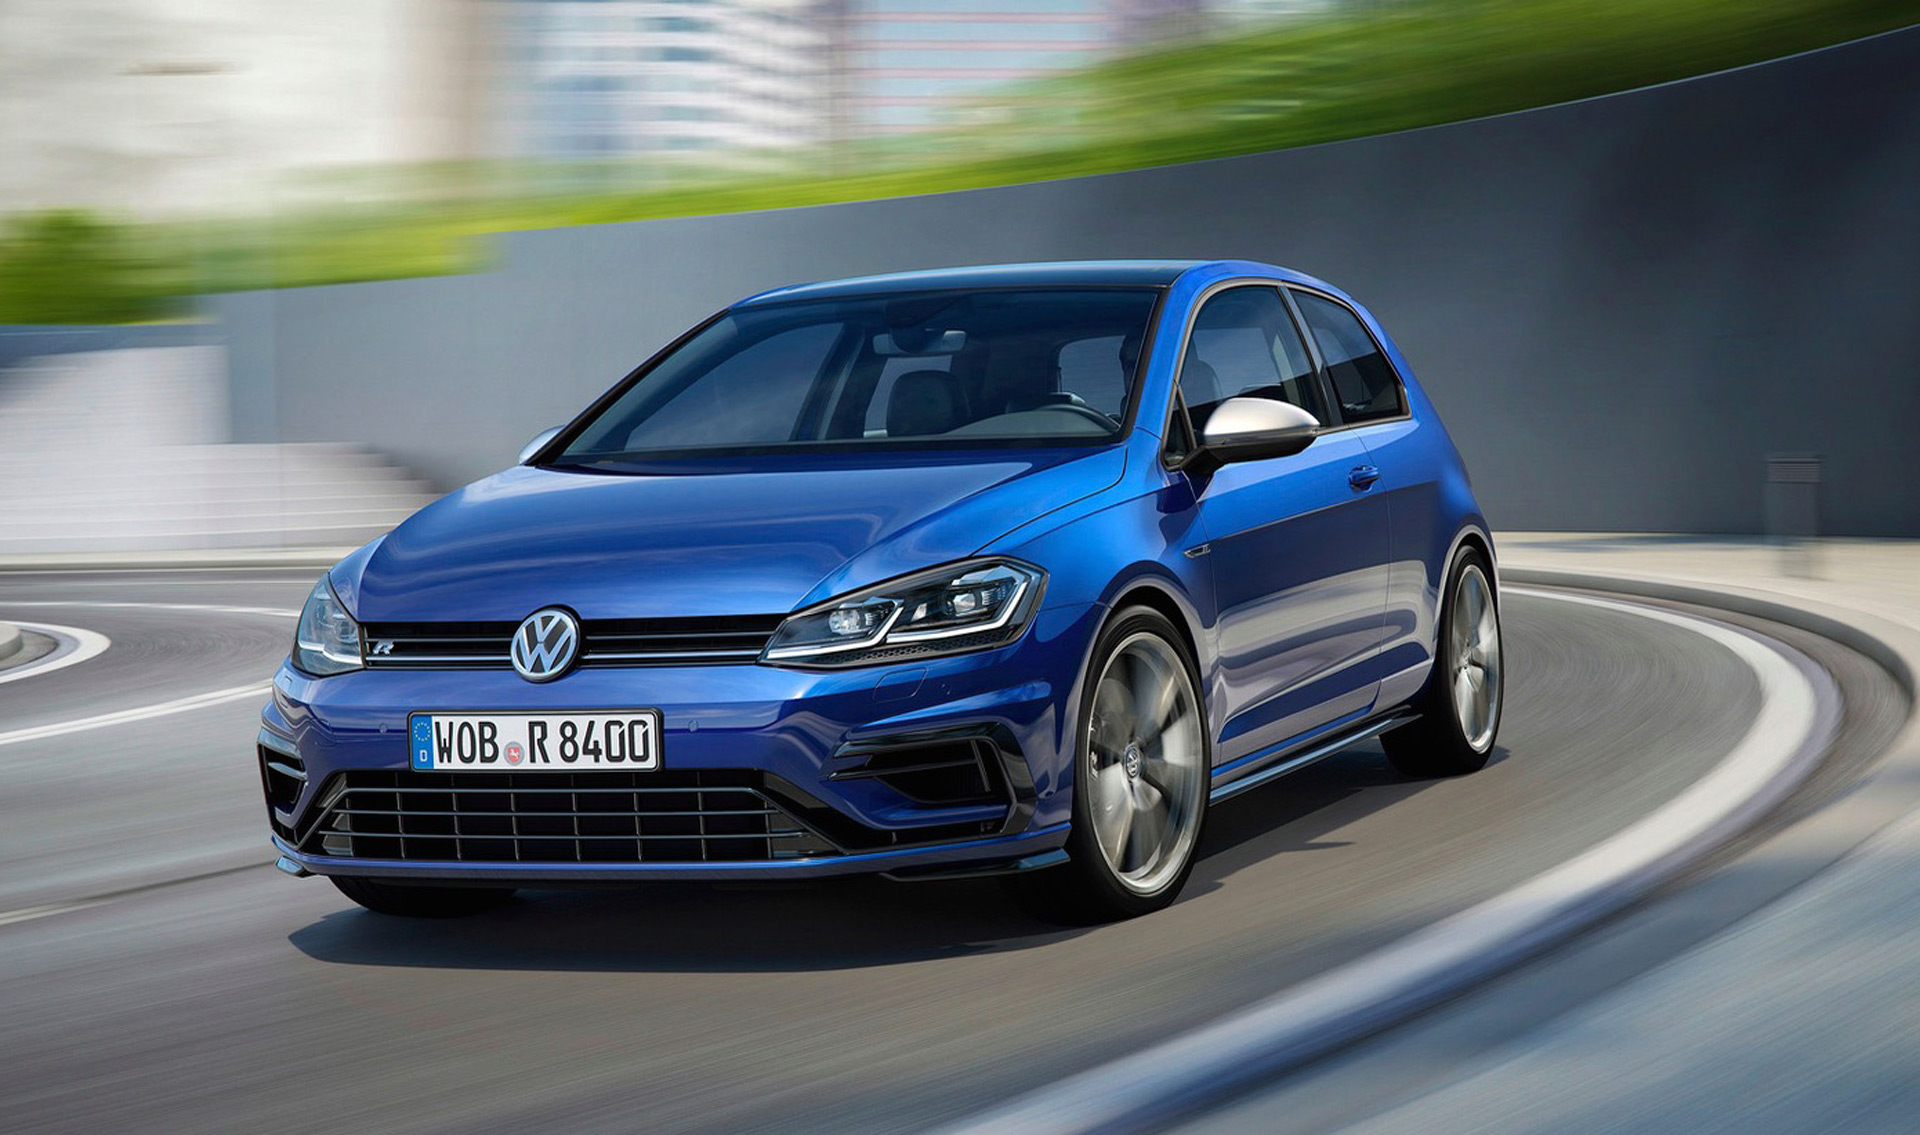 2018 Volkswagen Golf R first drive review: no juvenile delinquent